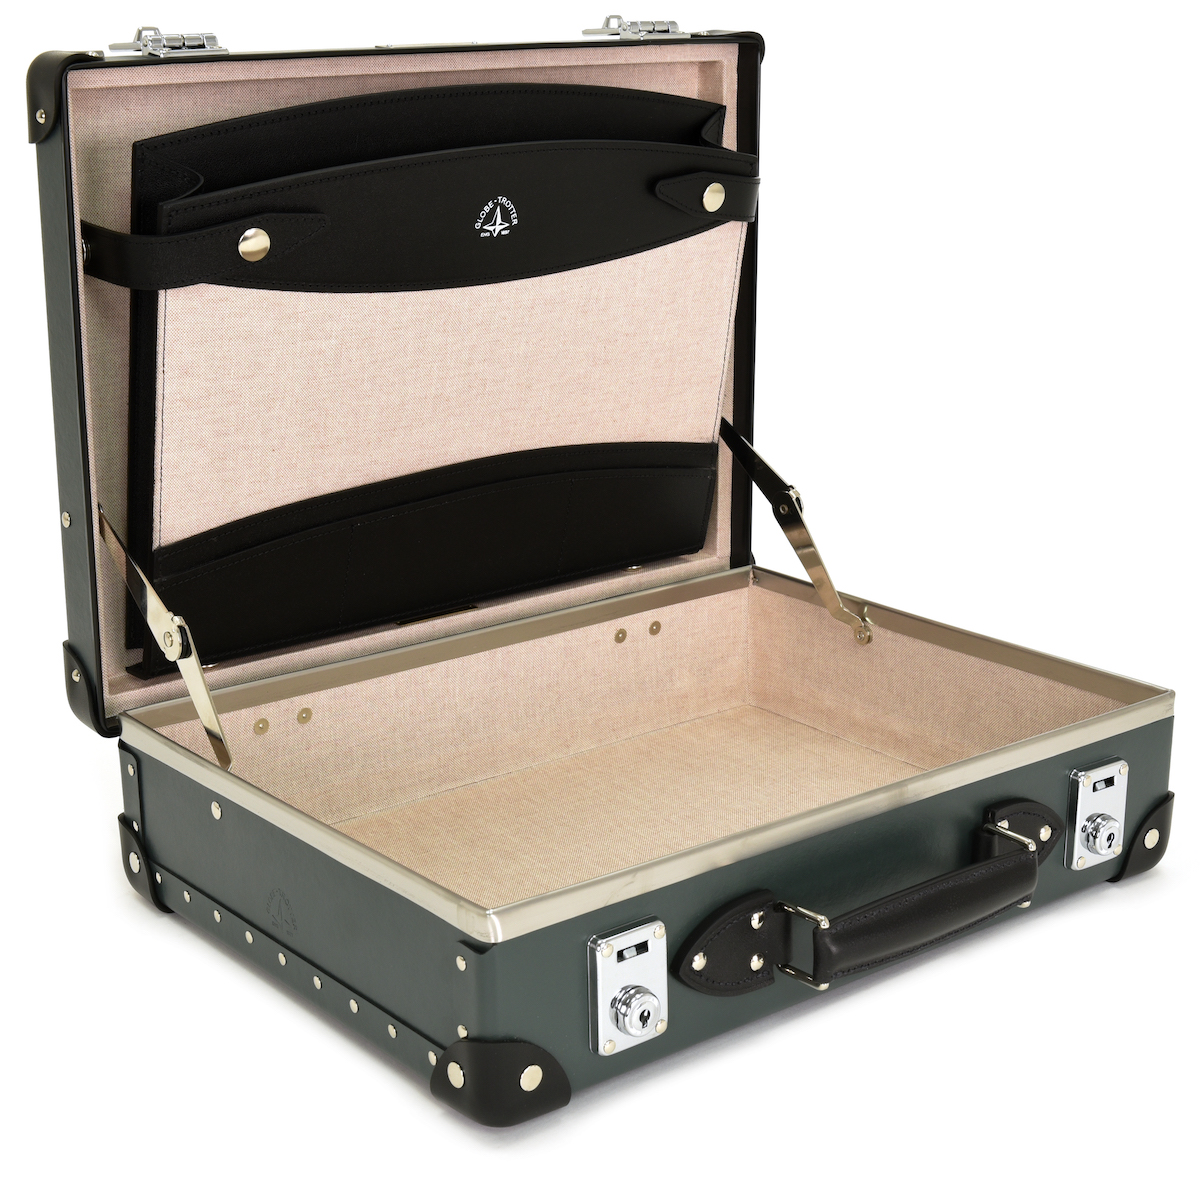 Globe-Trotter Attaché Case No Time To Die collection open interior